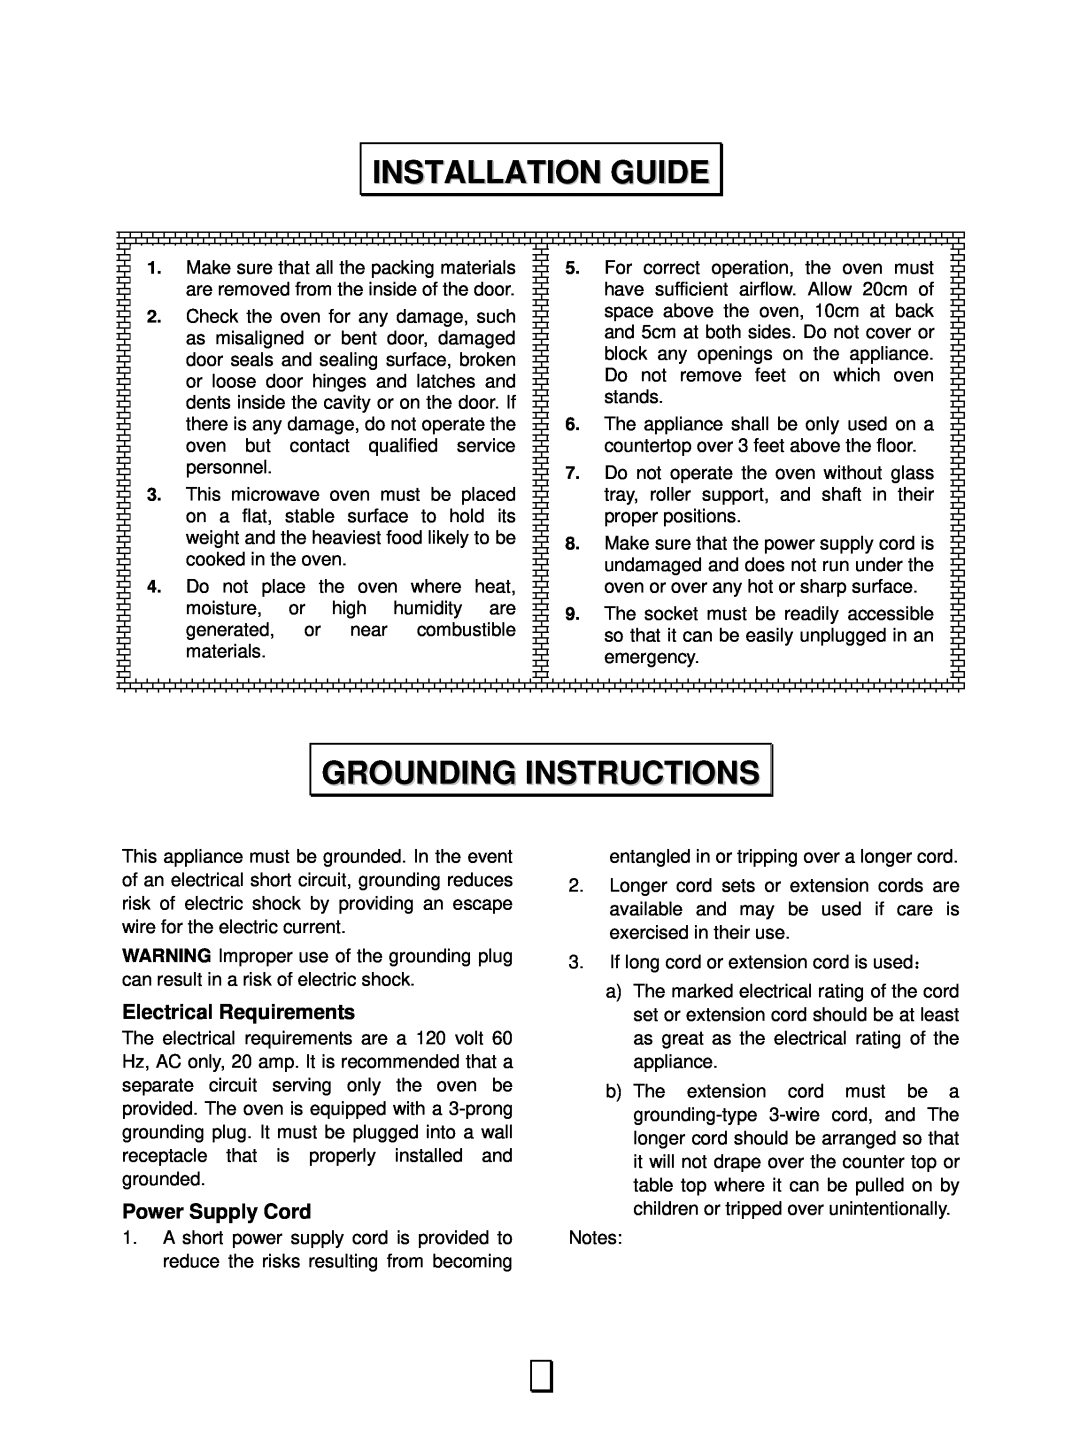 RCA RMW1156 owner manual Installation Guide, Grounding Instructions, Electrical Requirements, Power Supply Cord 